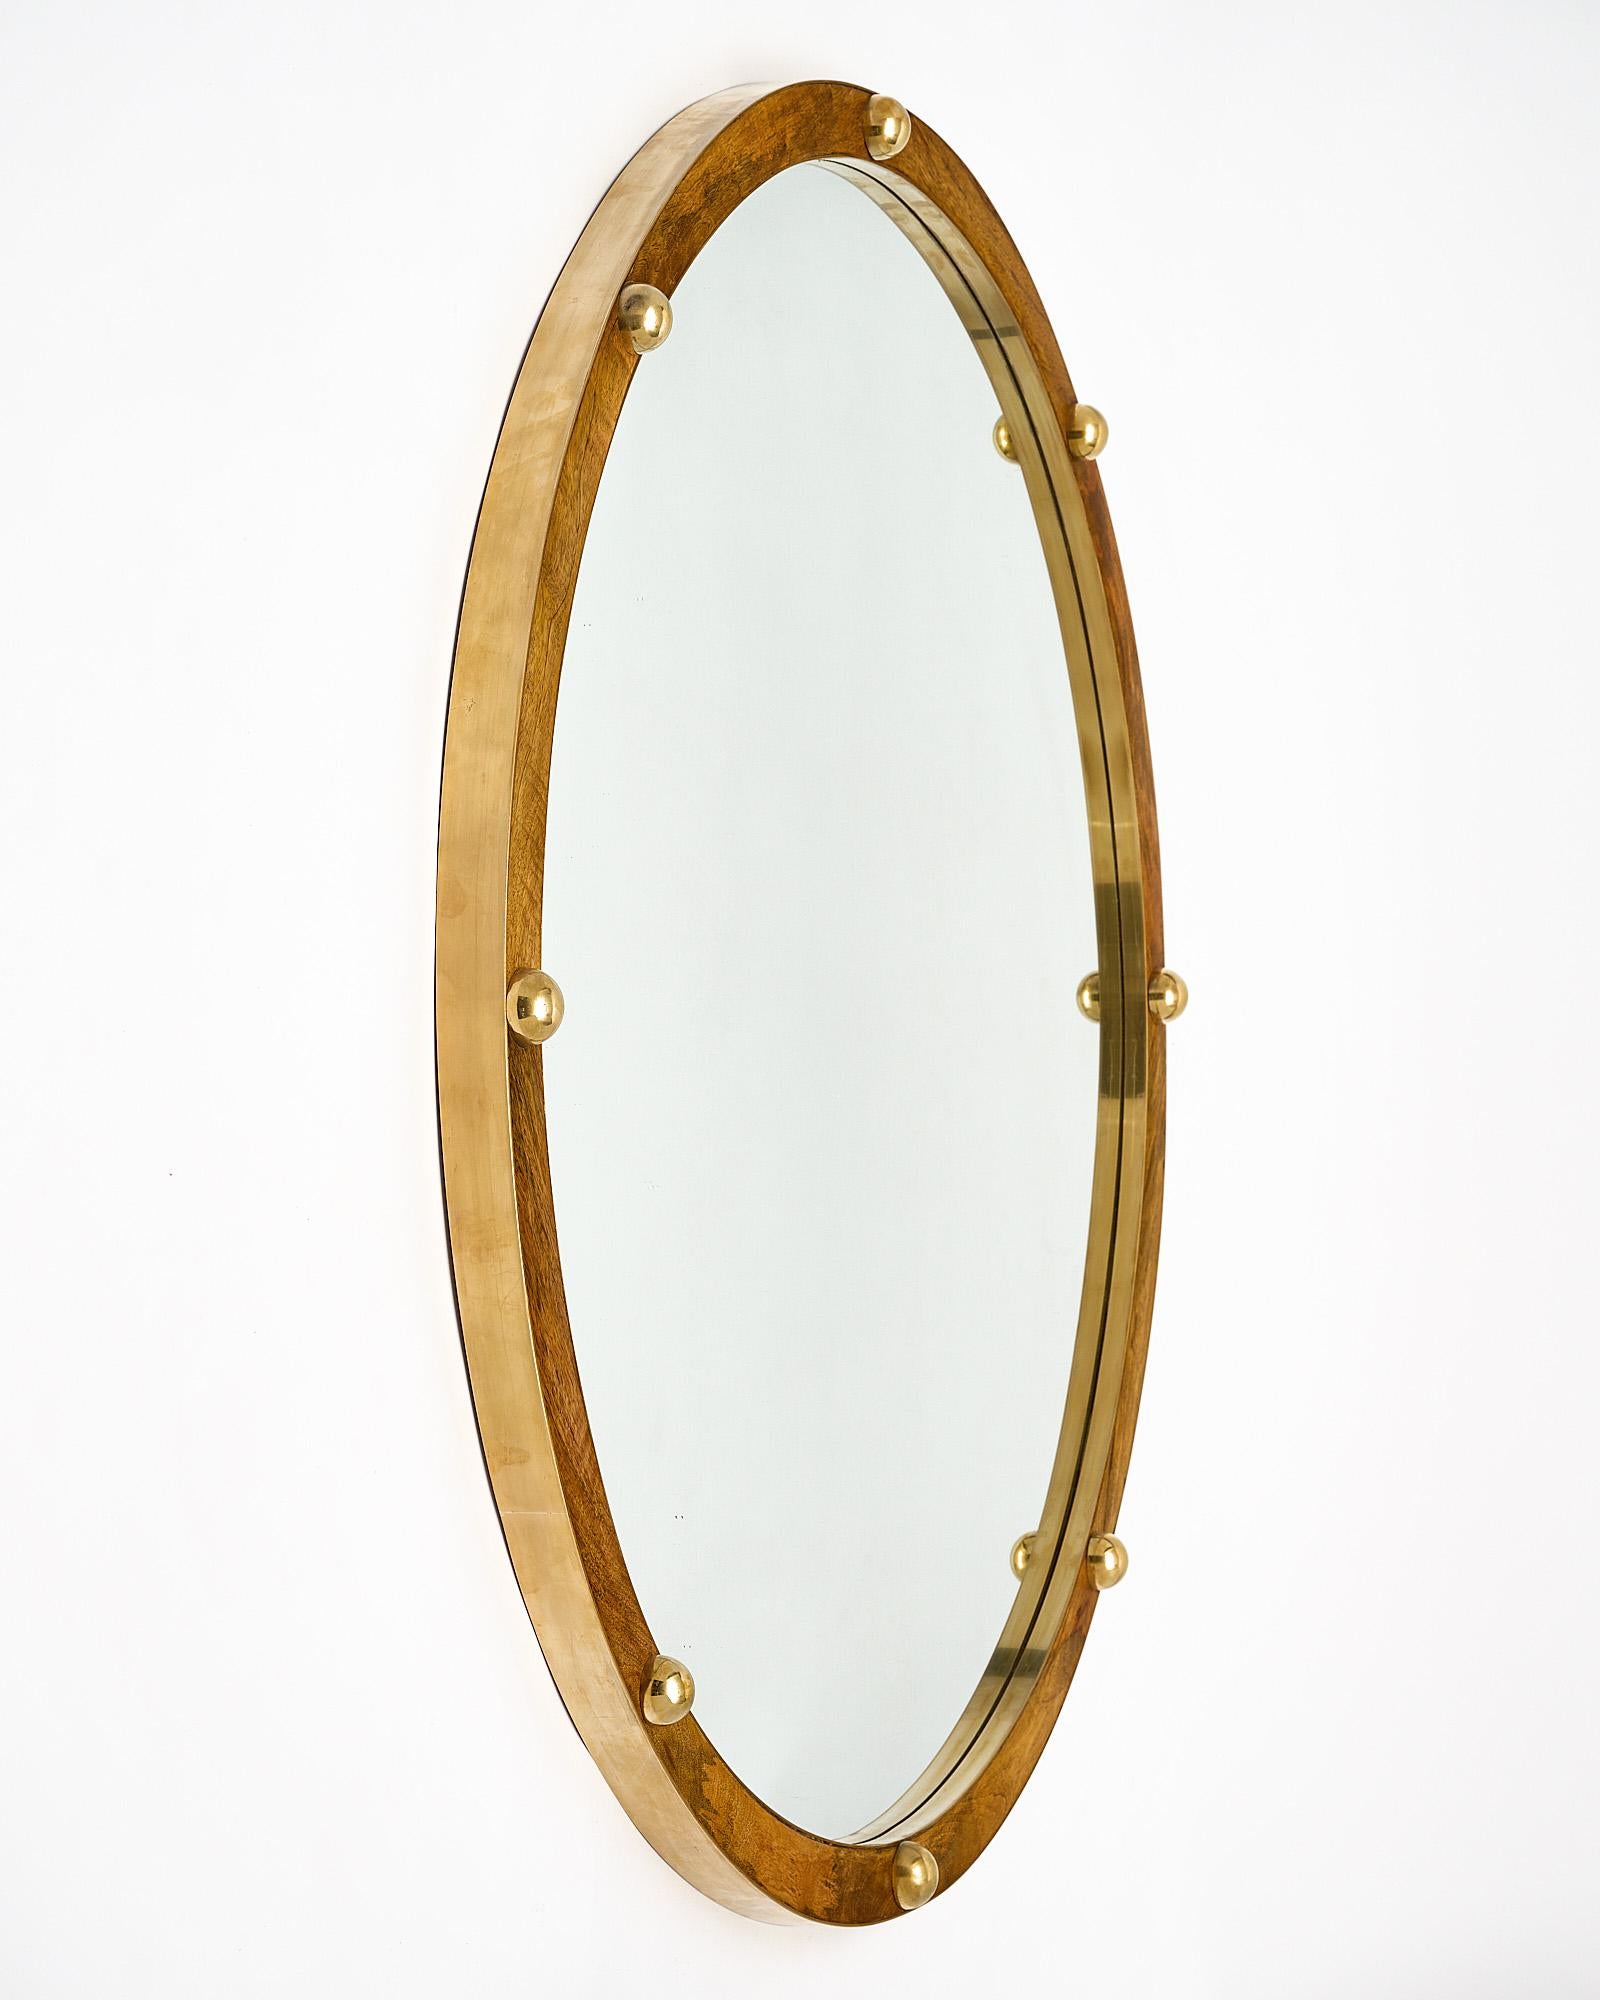 Italian wooden and brass mirror. This round mirror features a wooden frame finished in French polish with half spheric solid brass studs.